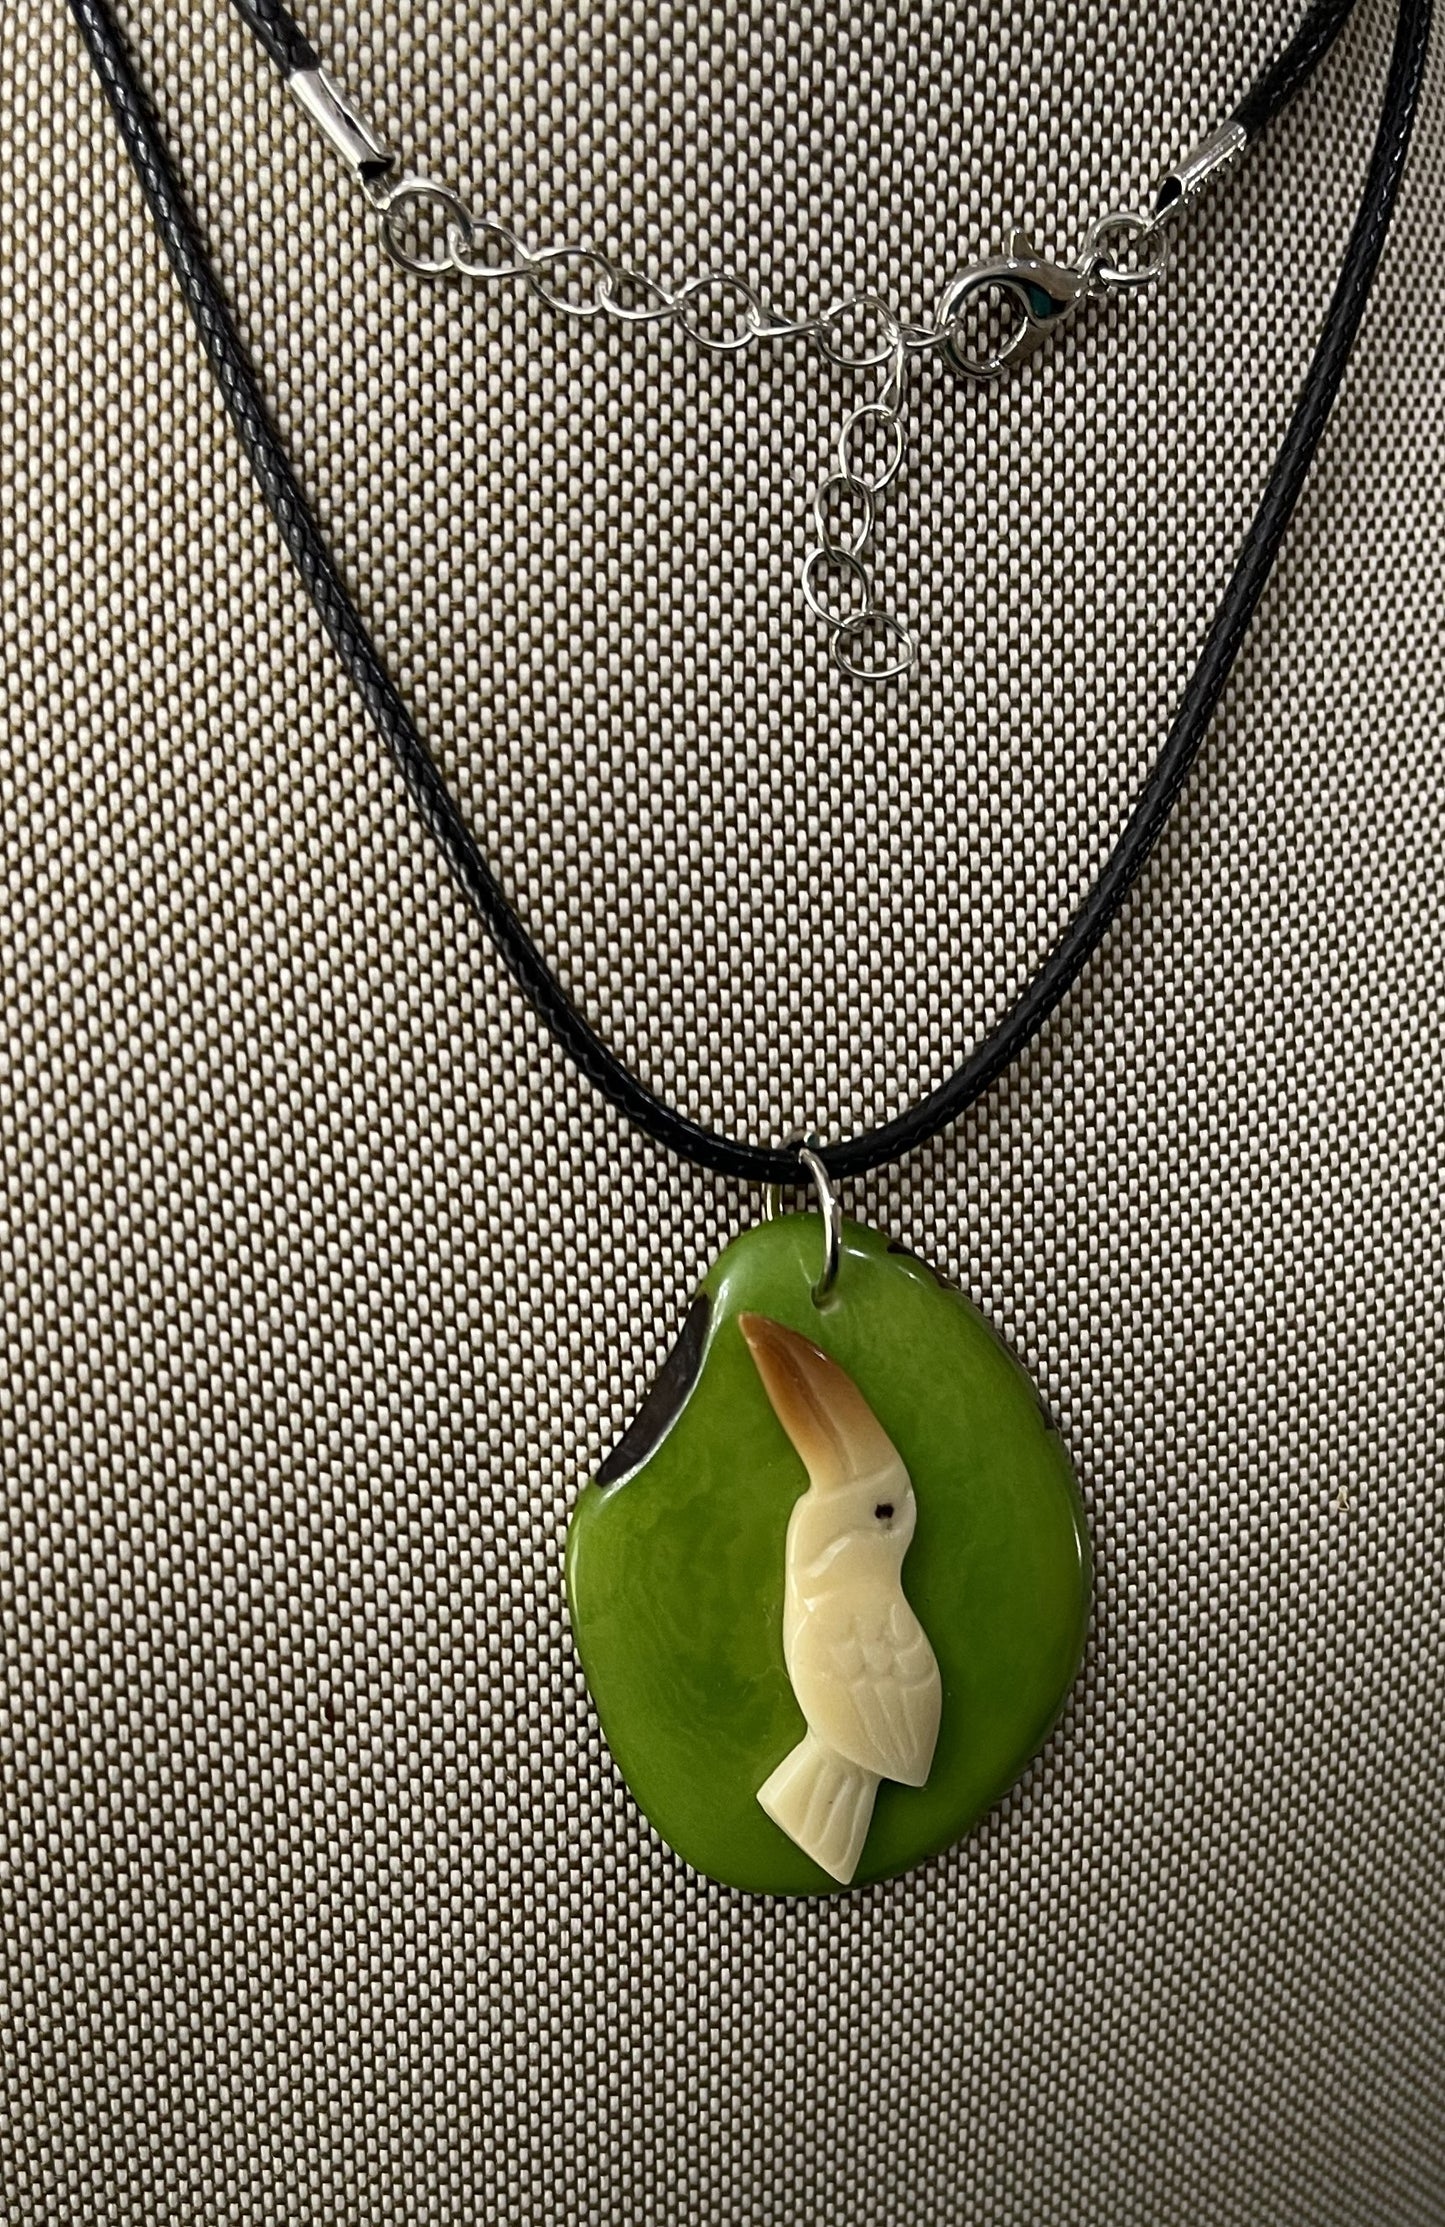 Tagua Carved Toucan Parrot On Tagua Necklace Pendant Panama